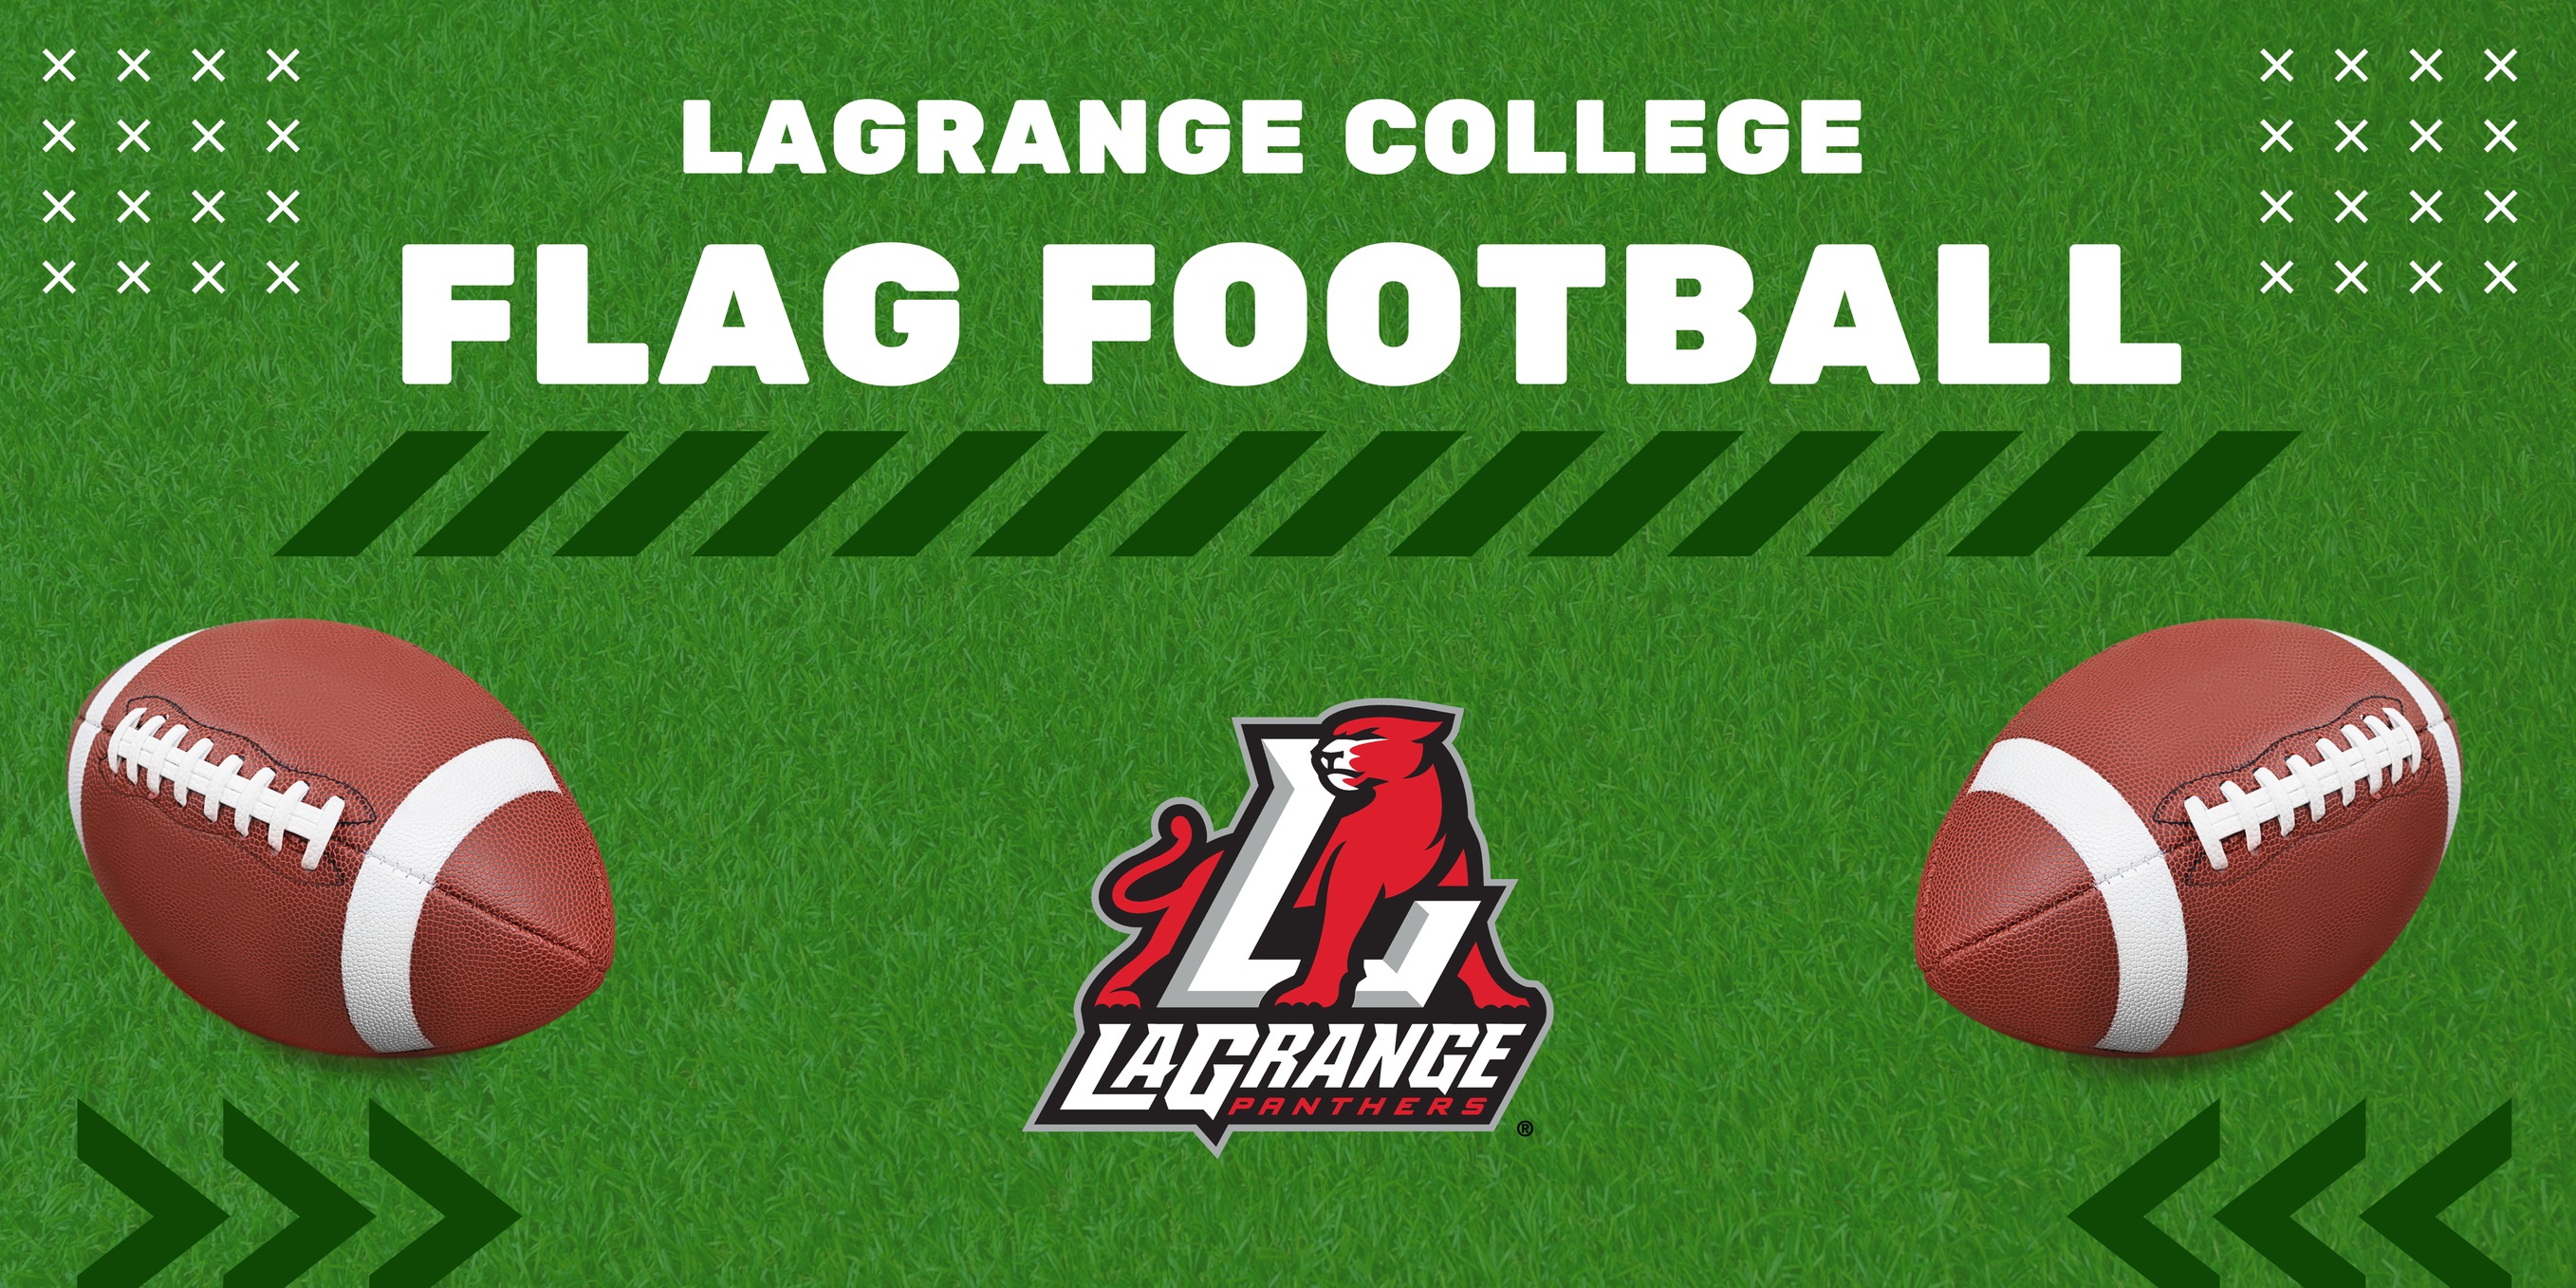 Women&rsquo;s flag football announced at LaGrange College